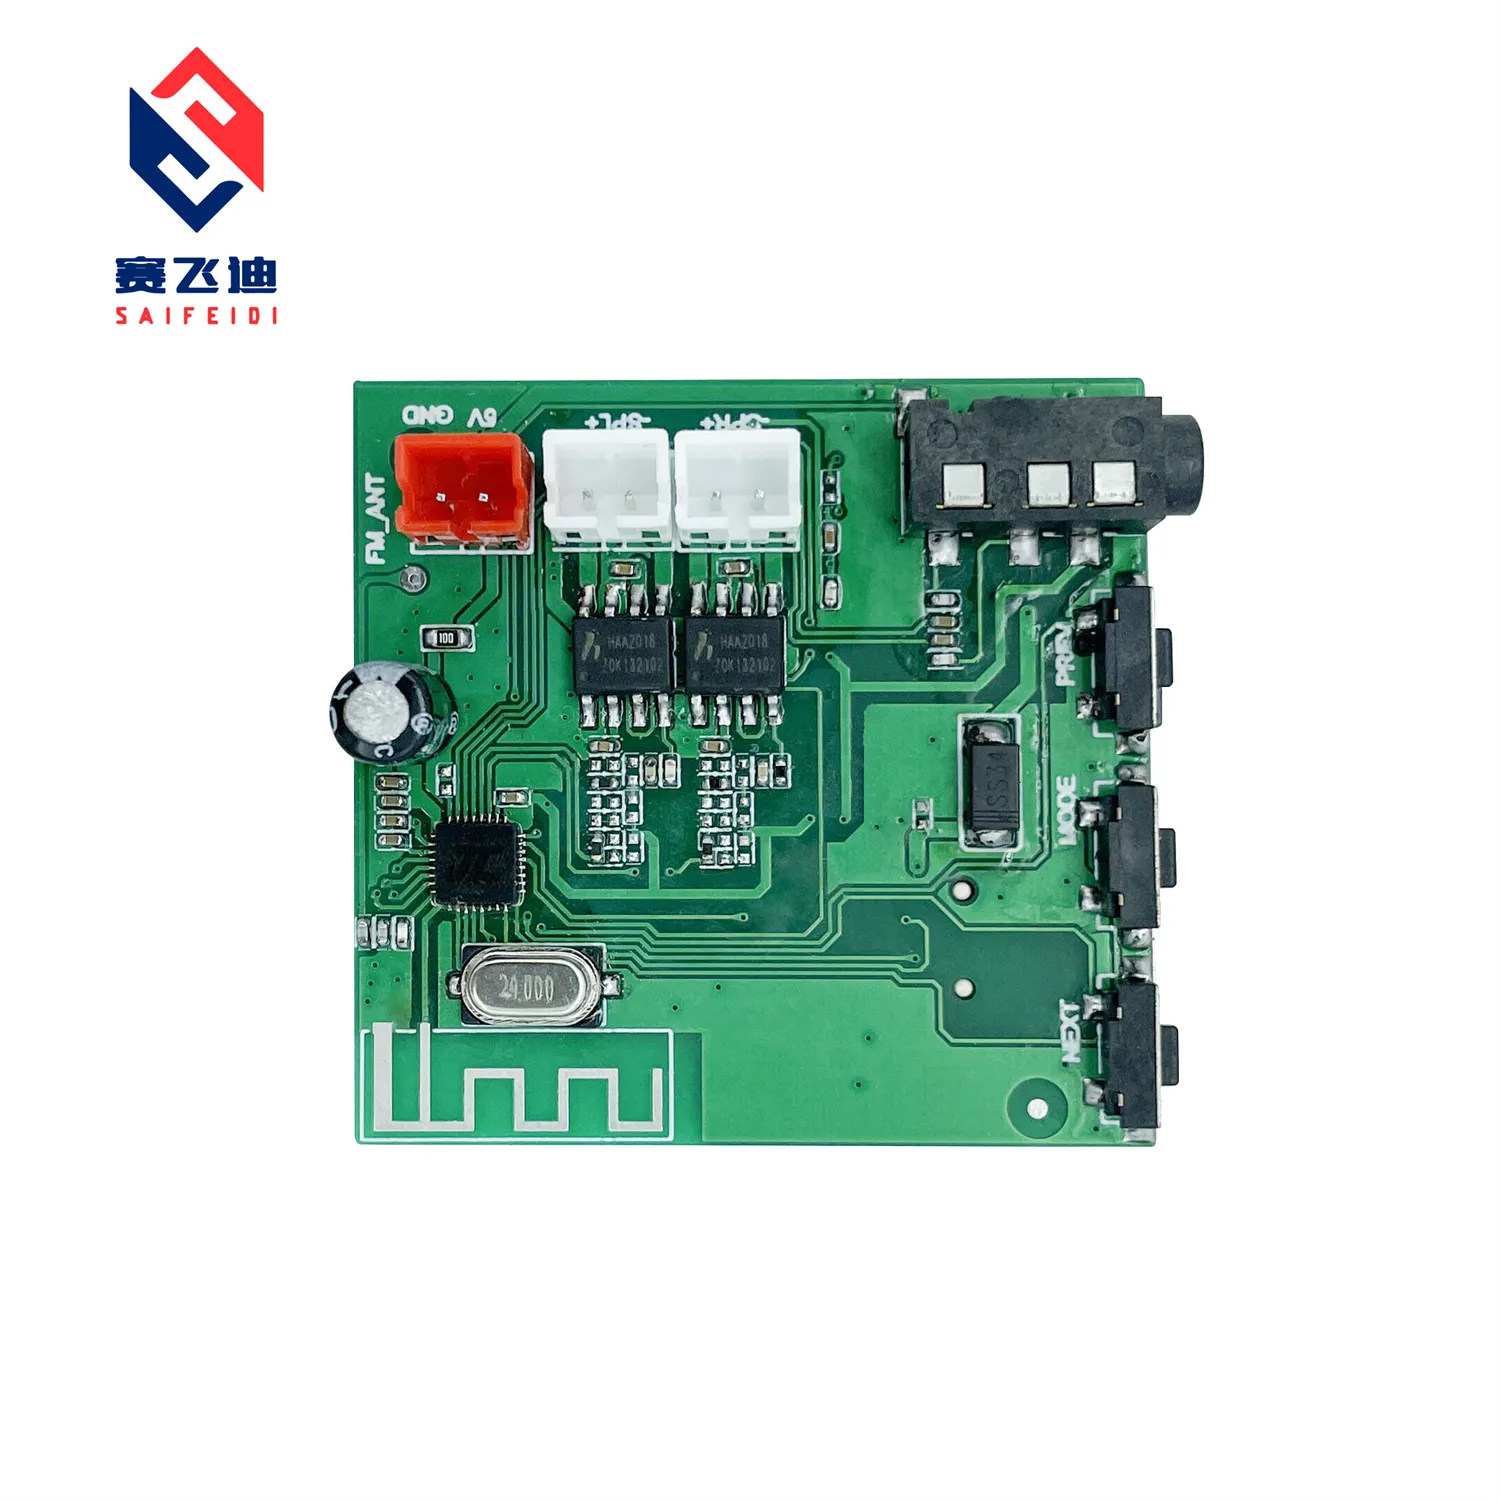 Blue tooth USB TF Fm Radio MP3 with Amplifier Decoder Board Wireless Audio Module Circuit Board SKD assemble